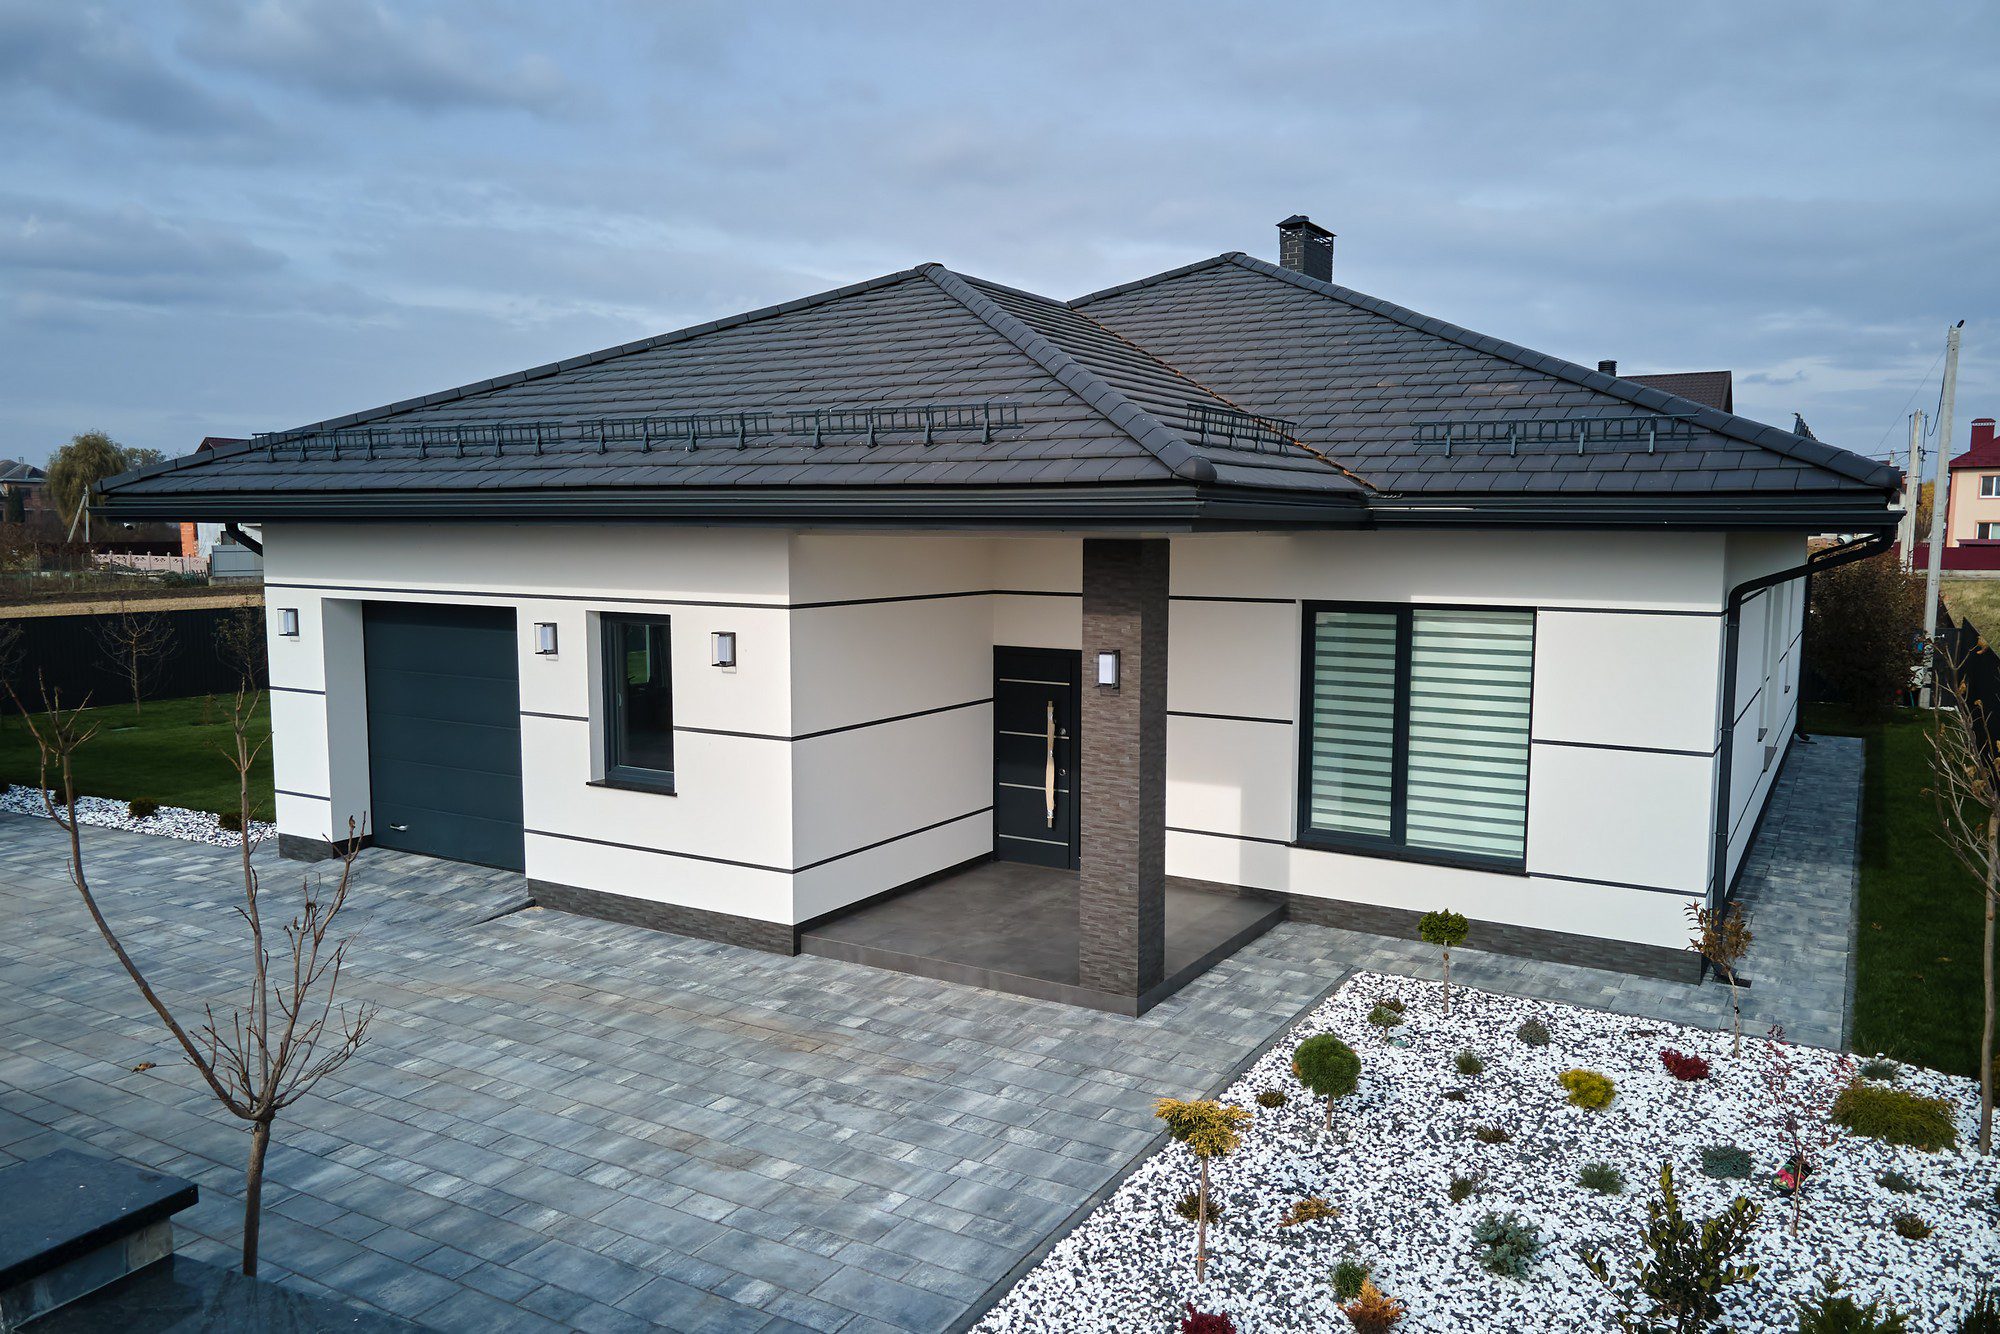 This is an image of a modern single-story detached house with a hip roof. The facade of the house features a combination of white render and dark gray or black cladding. The home has dark-framed windows, some of which are large and likely let in plenty of natural light. There is a dark entrance door complemented by a matching garage door.The house is surrounded by a well-maintained outdoor area with a paved driveway and walkway, and there is a landscaped garden featuring a mix of flowering plants, shrubs, and decorative stones. There are no people or animals in the image; the focus is on the architecture and landscaping of the property. It looks well designed and modern, with attention to curb appeal and outdoor aesthetics.